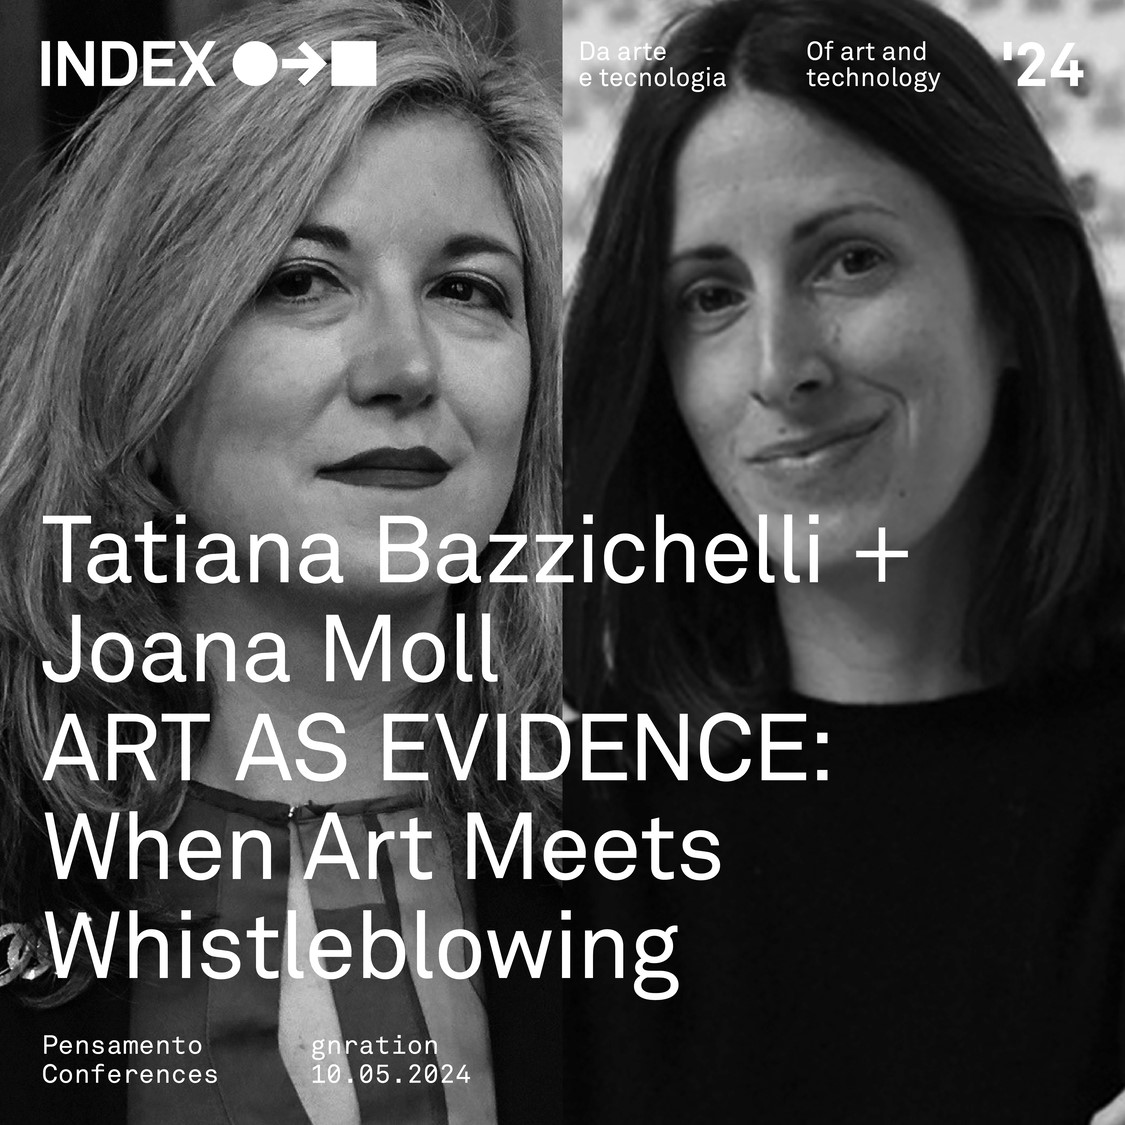 .@t_bazz and @joana_moll join #INDEX2024 to discuss the concept of #ArtAsEvidence and the impact of #whistleblowing on art and culture, from the first #WikiLeaks projects to the Edward #Snowden revelations. 10 may, 6 pm at @gnrationpt in Braga (Portugal): indexmediaarts.com/tatiana-bazzic…